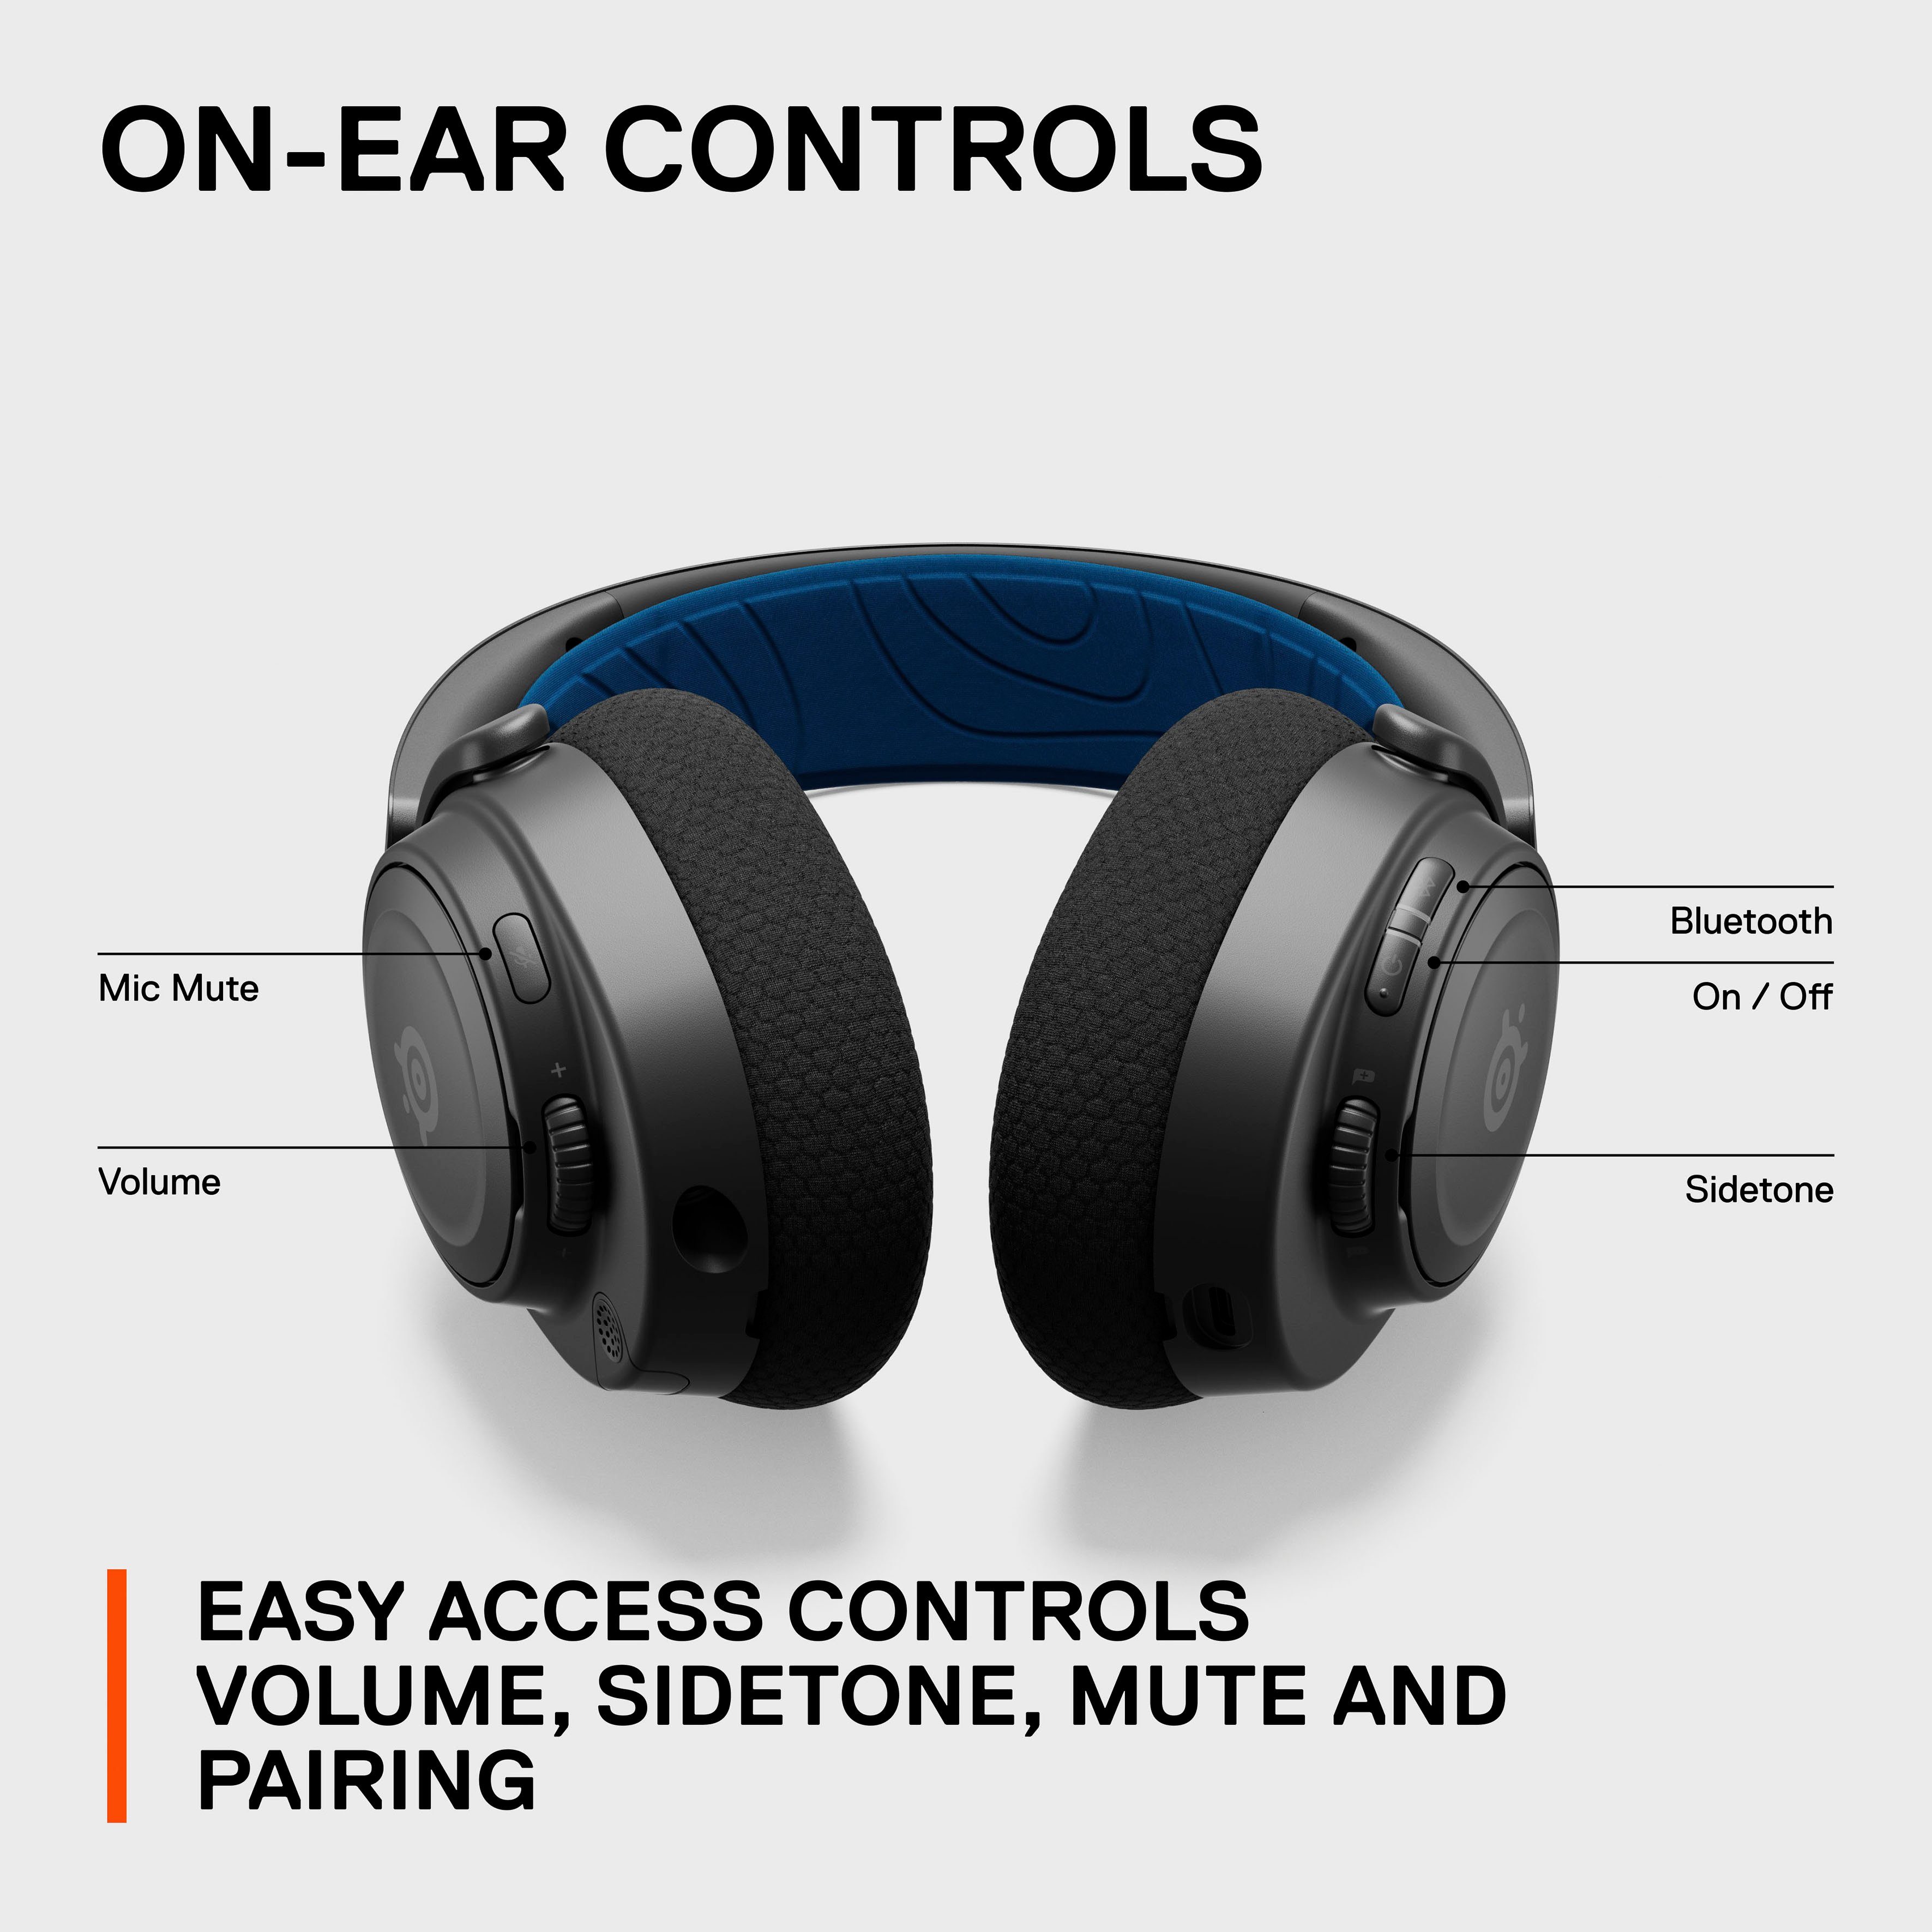 SteelSeries Arctis Nova 7P Gaming-Headset (Noise-Cancelling, Bluetooth, Wireless)